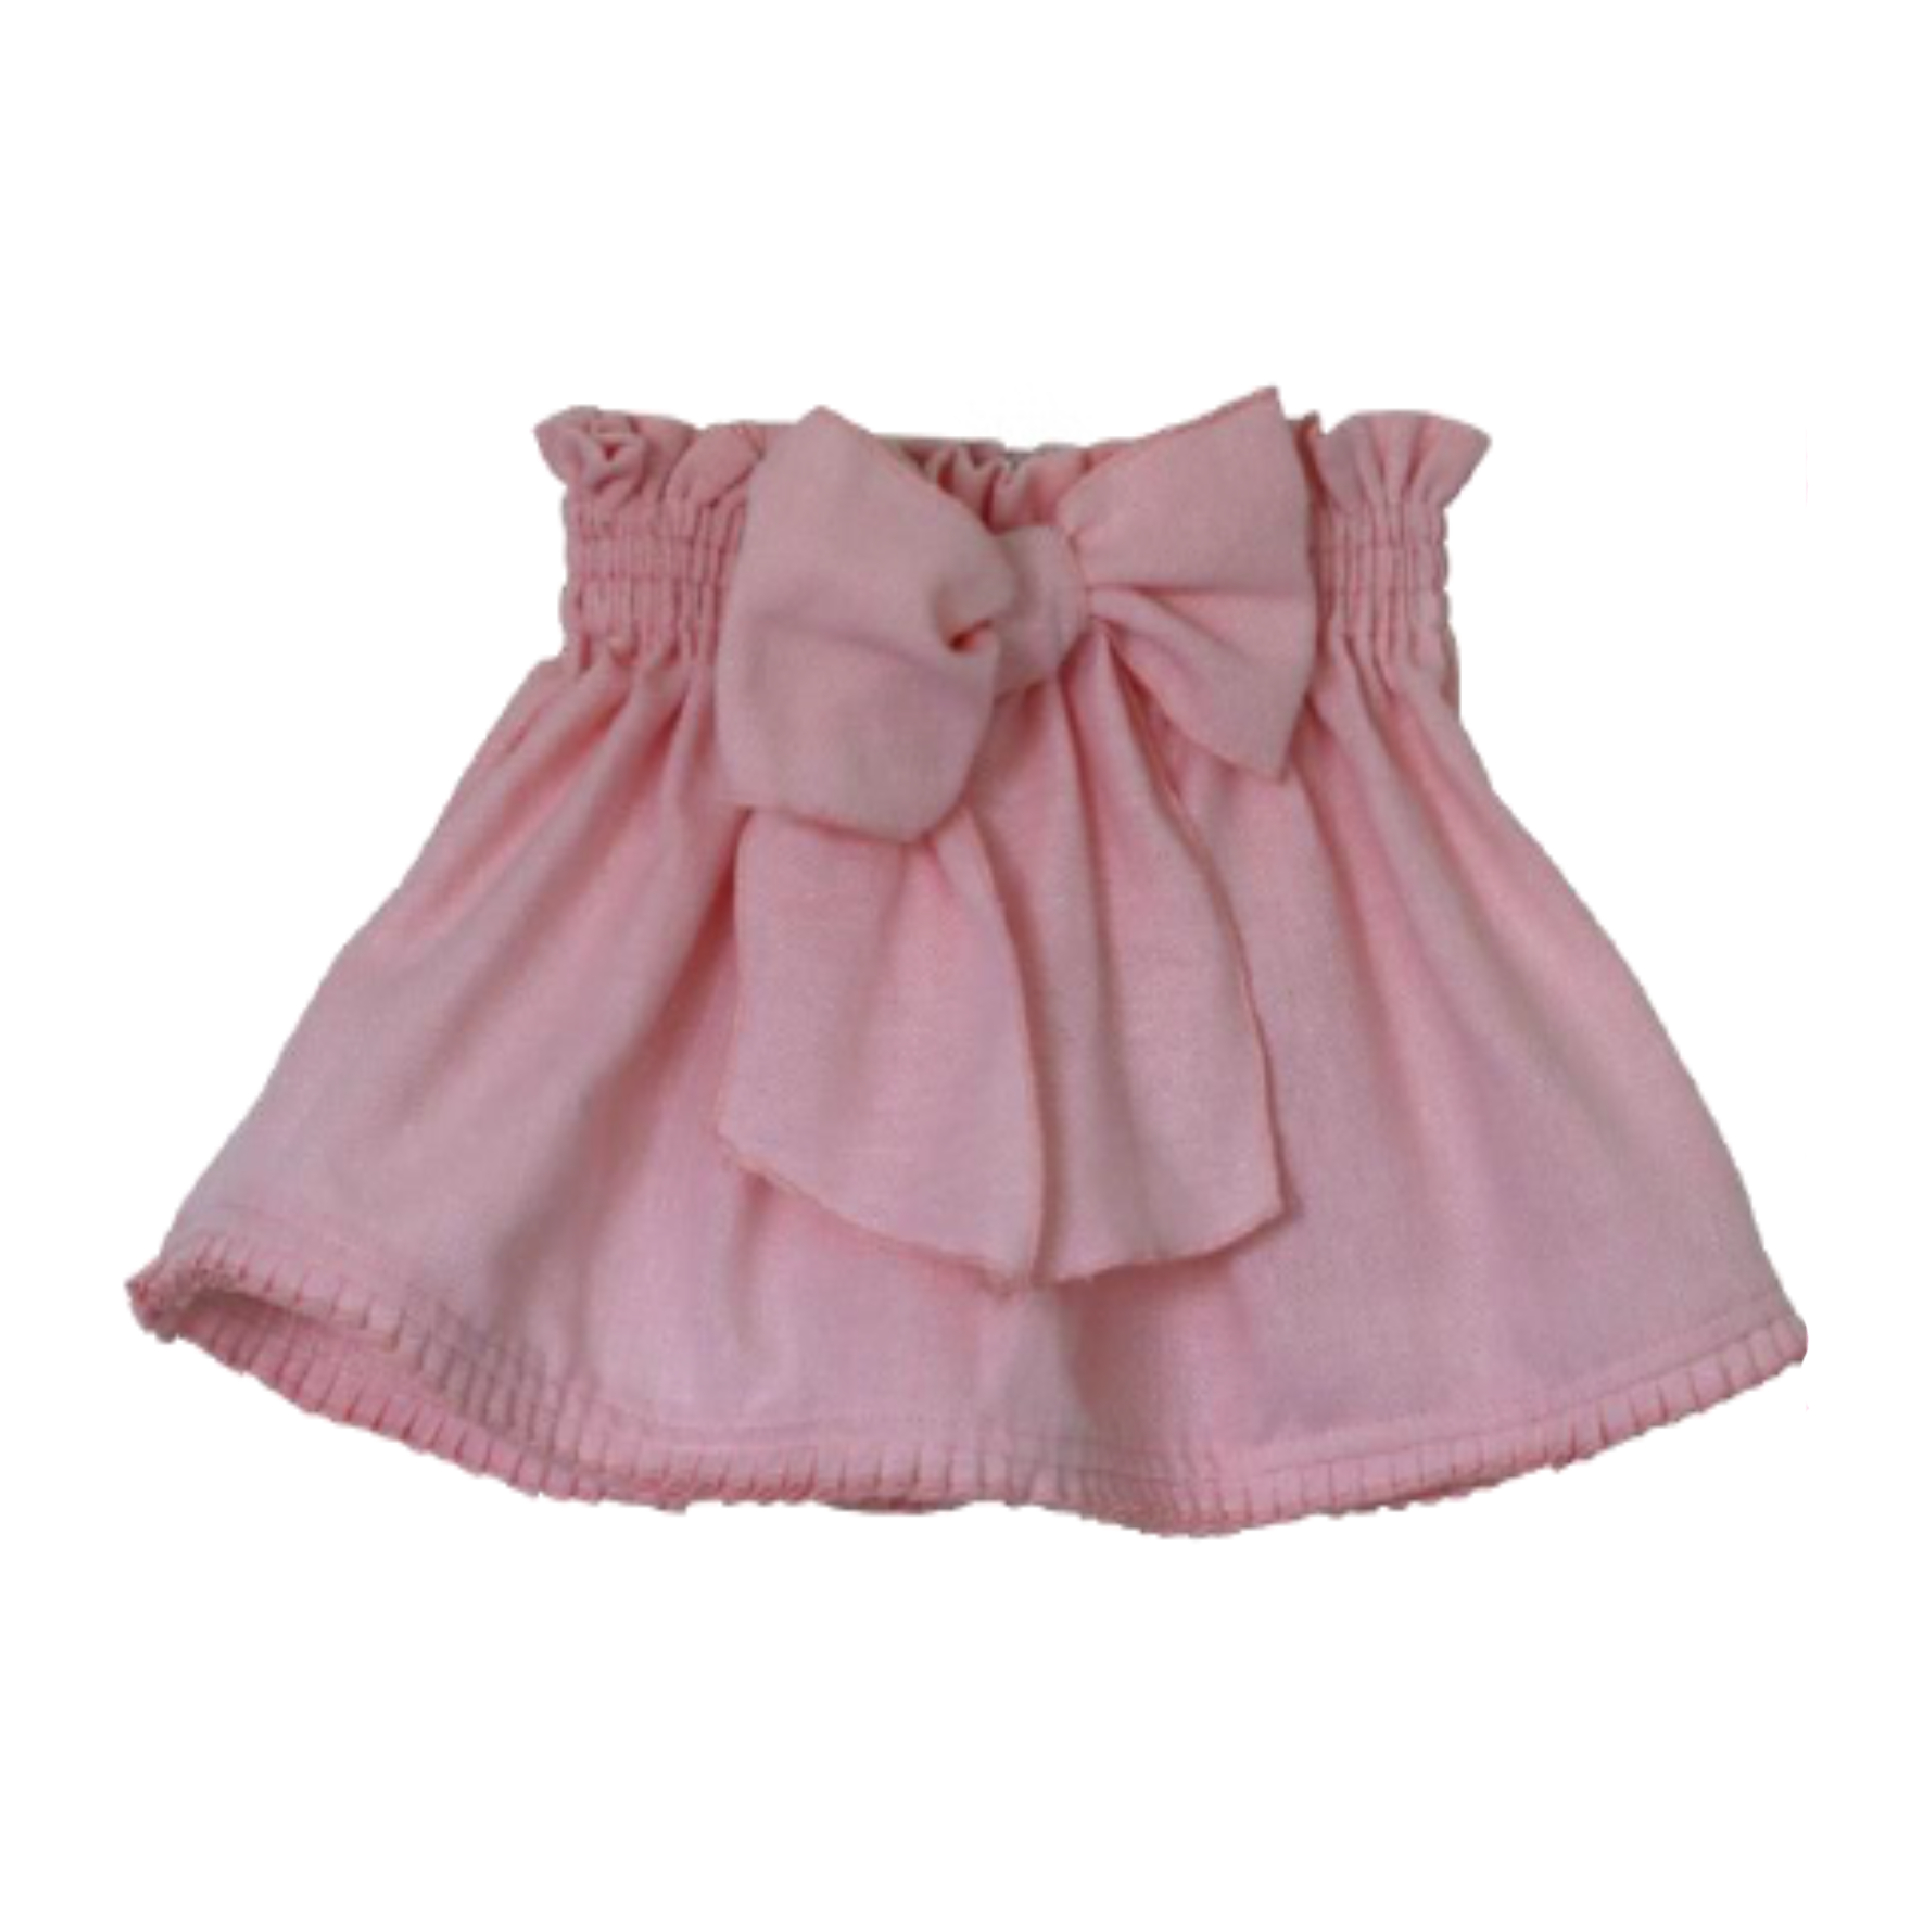 Pink skirt with frill pleats